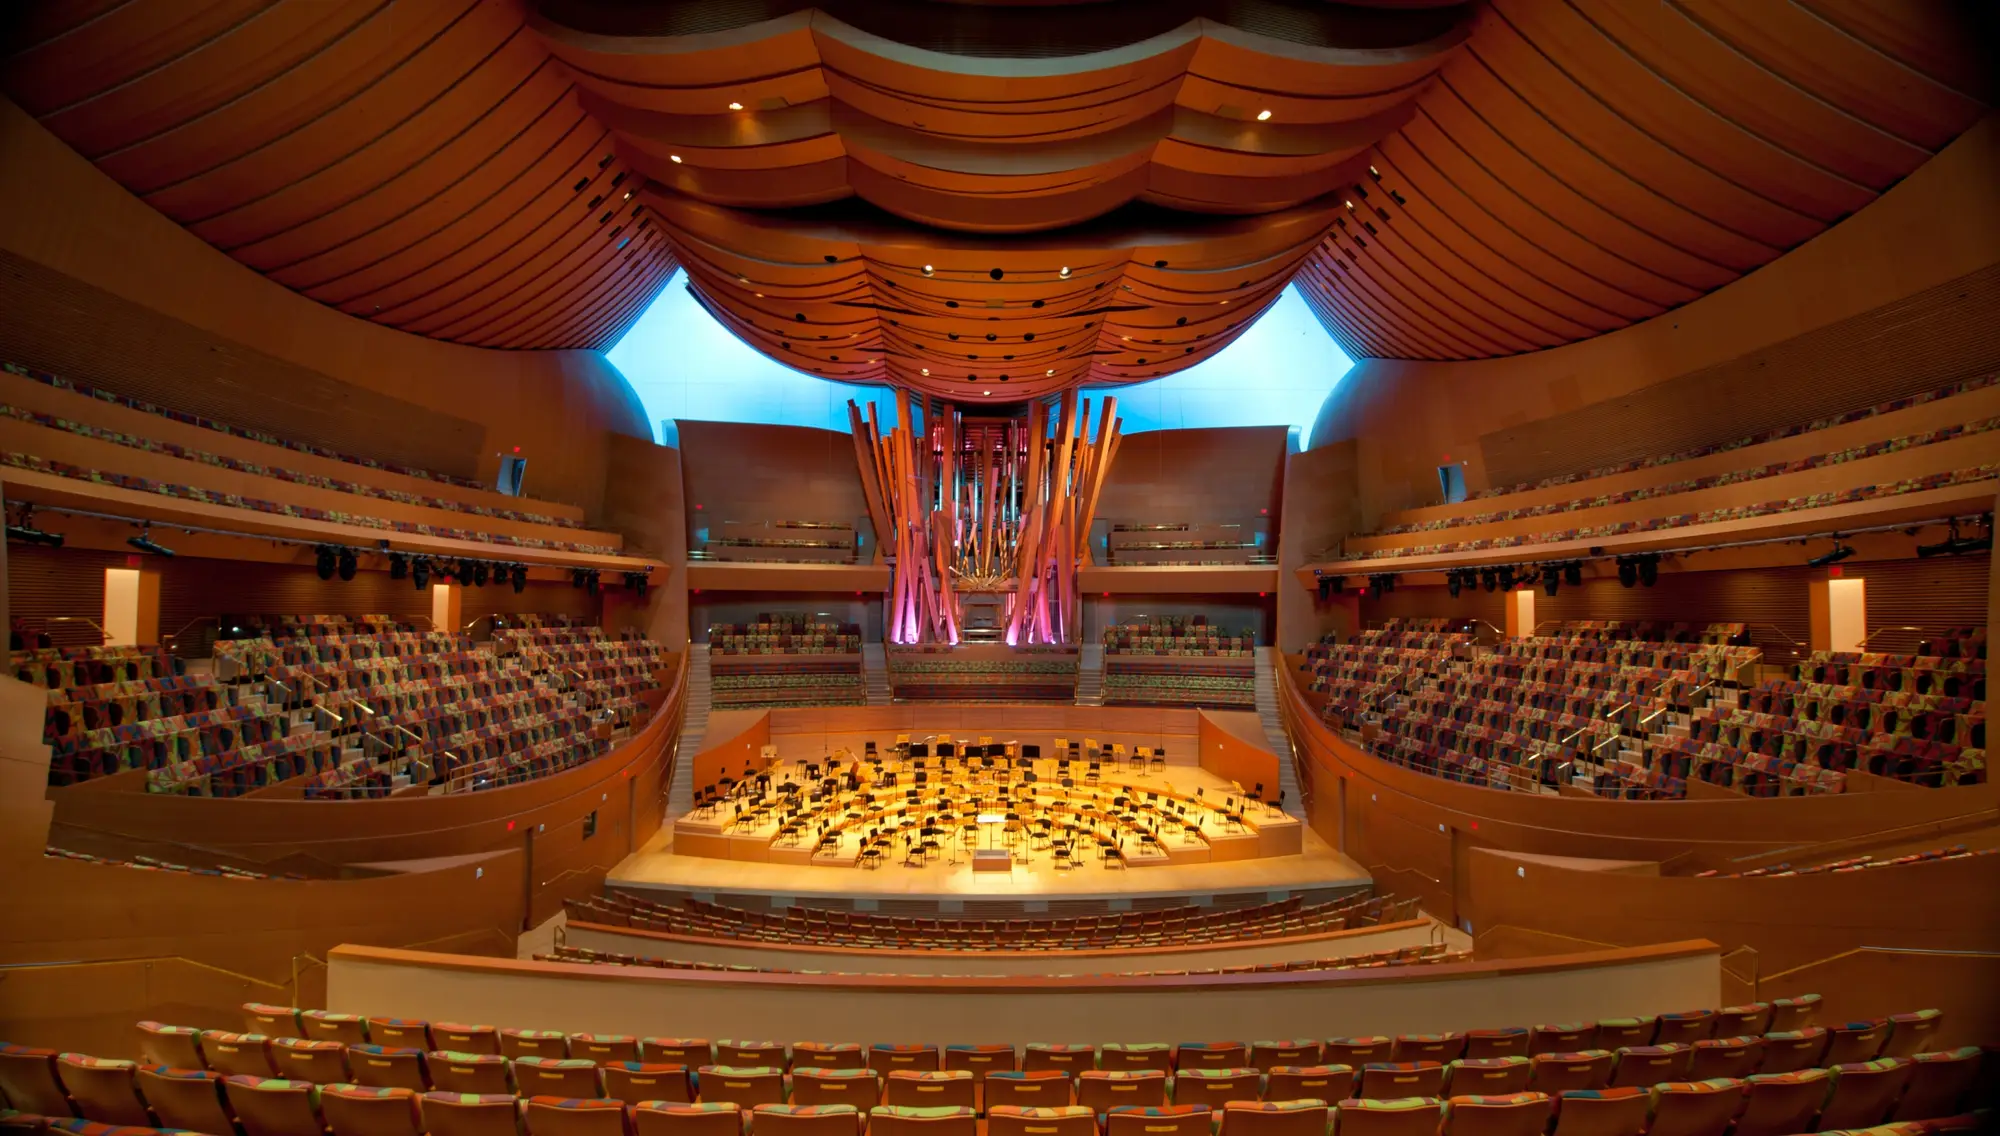 A view of the organ from the stage of Walt Disney Concert Hall. The organ is lit from within by golden light that showcases its rows of internal pipes and is also lit externally by blue light that highlights the upward curves of the organ's largest pipes.